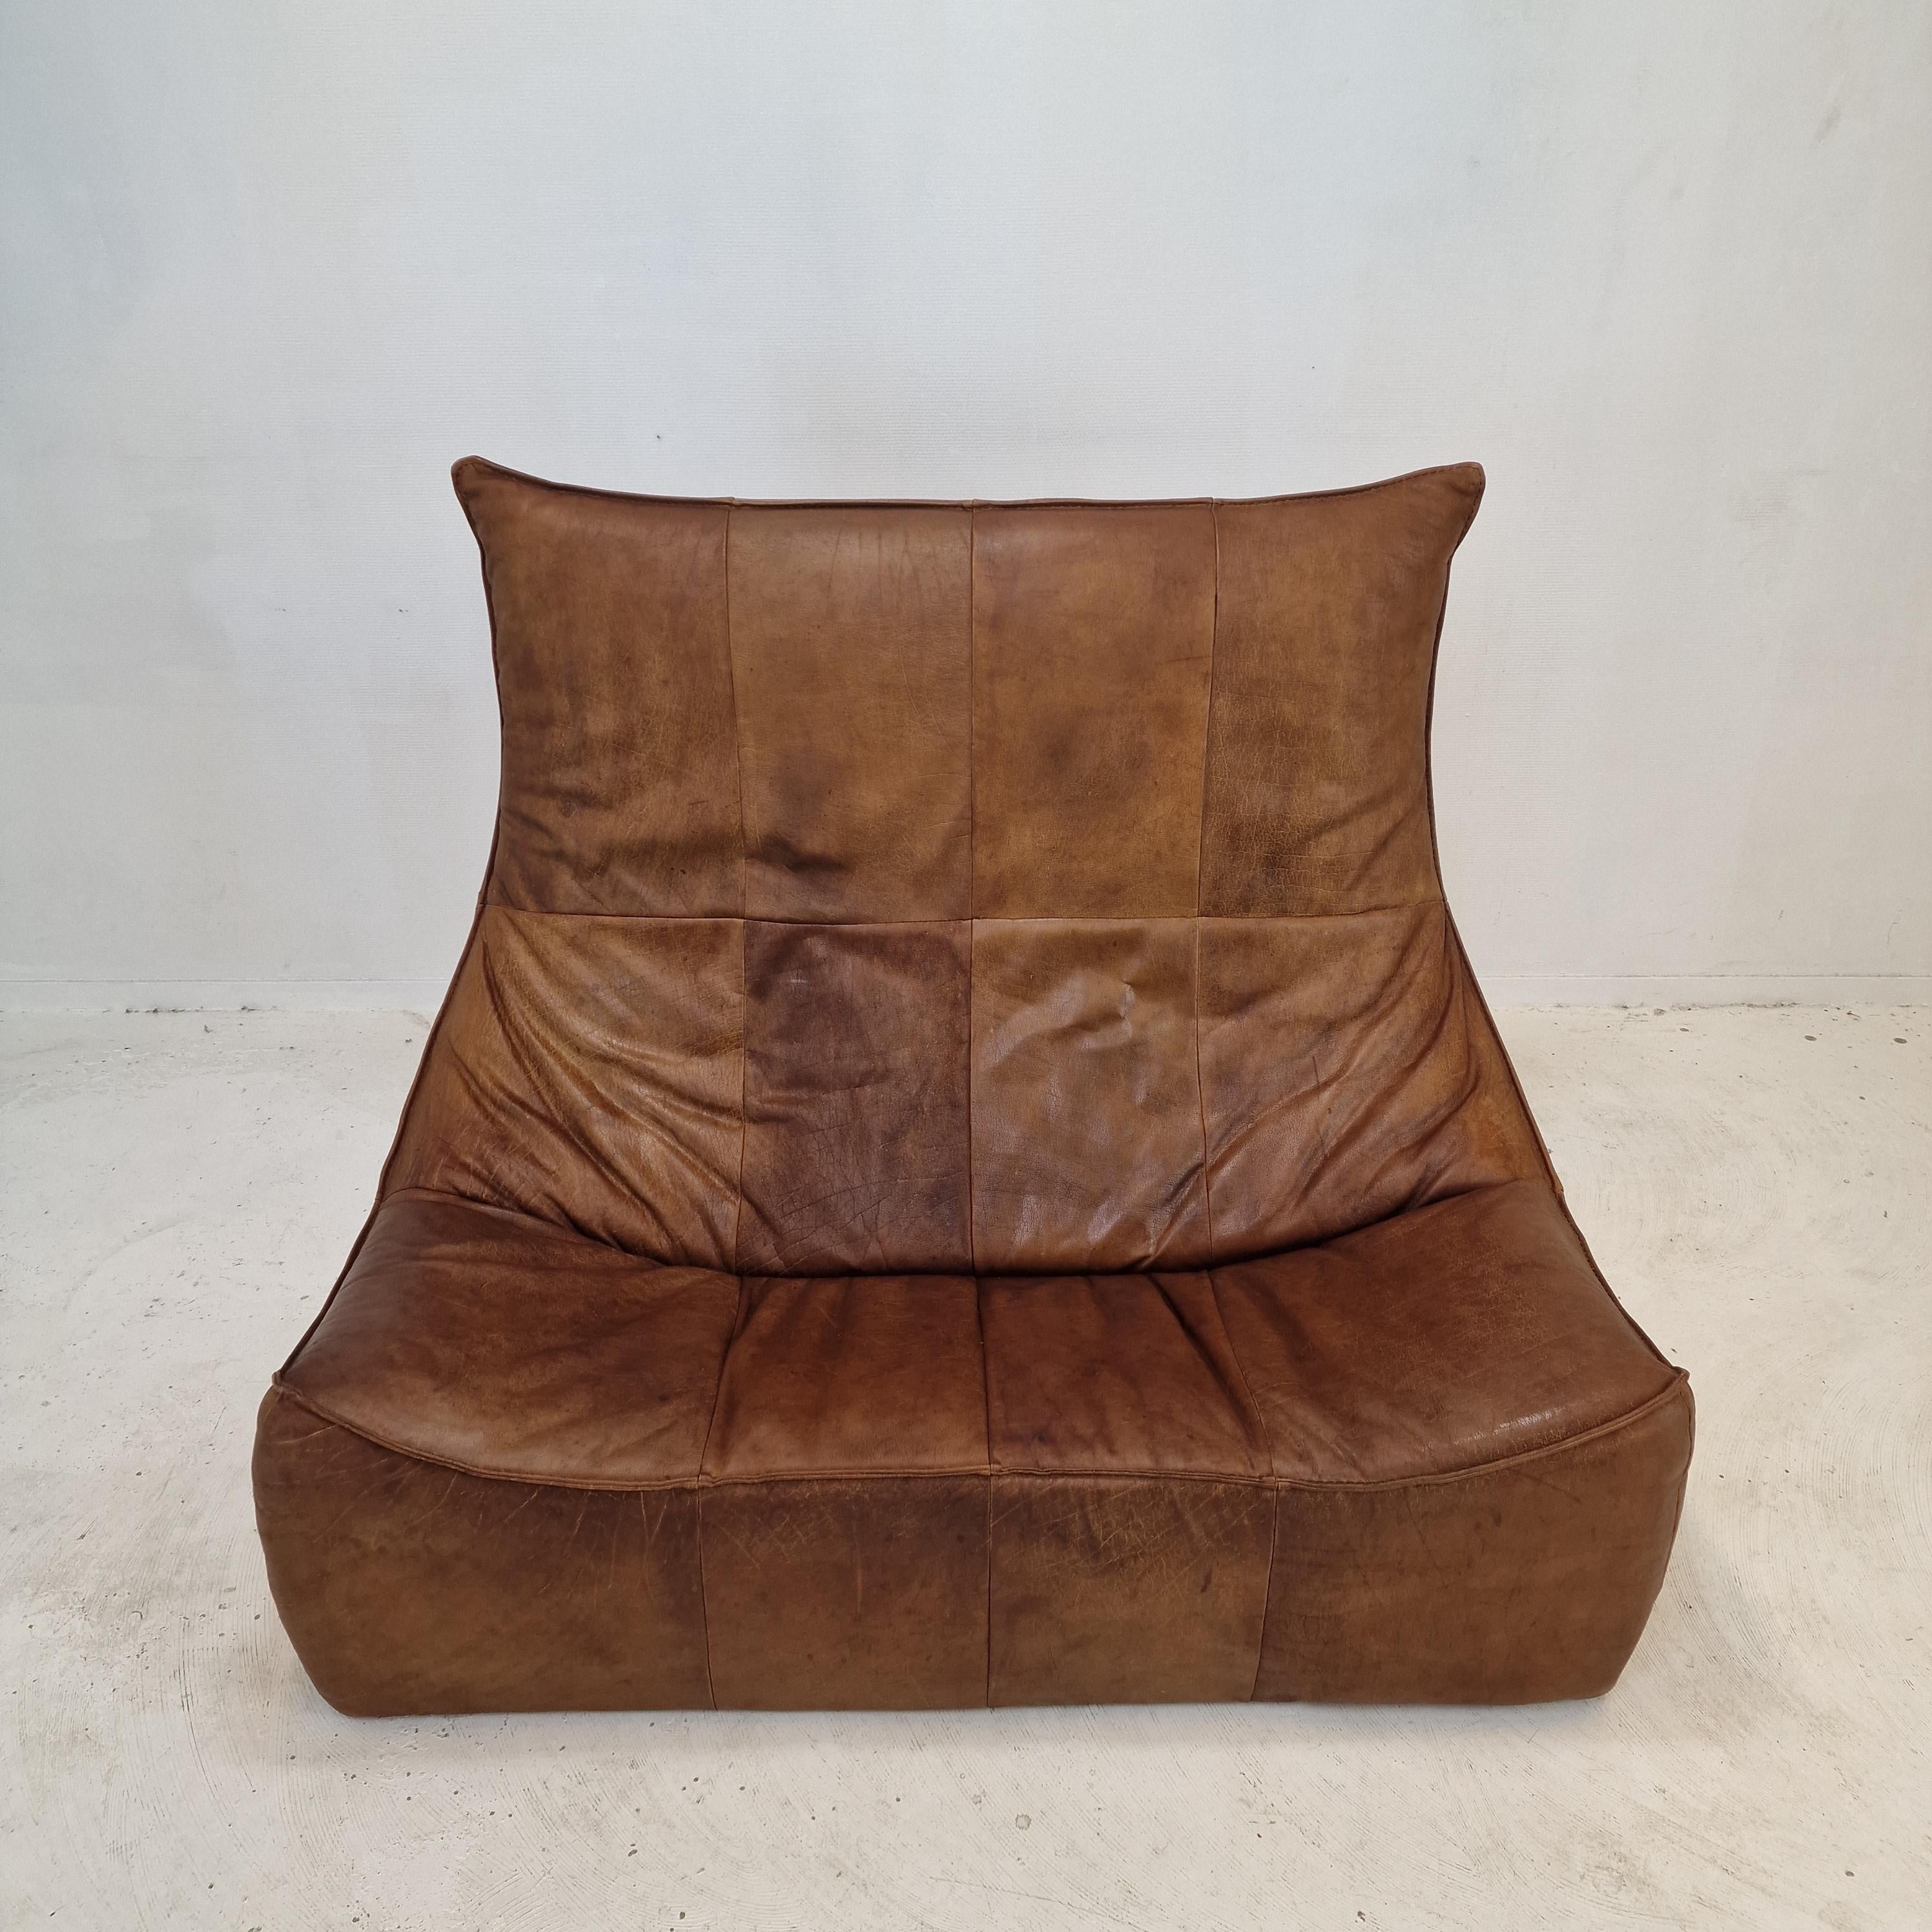 Montis “The Rock” Sofa In Brown Leather By Gerard Van Den Berg, 1970s For Sale 3